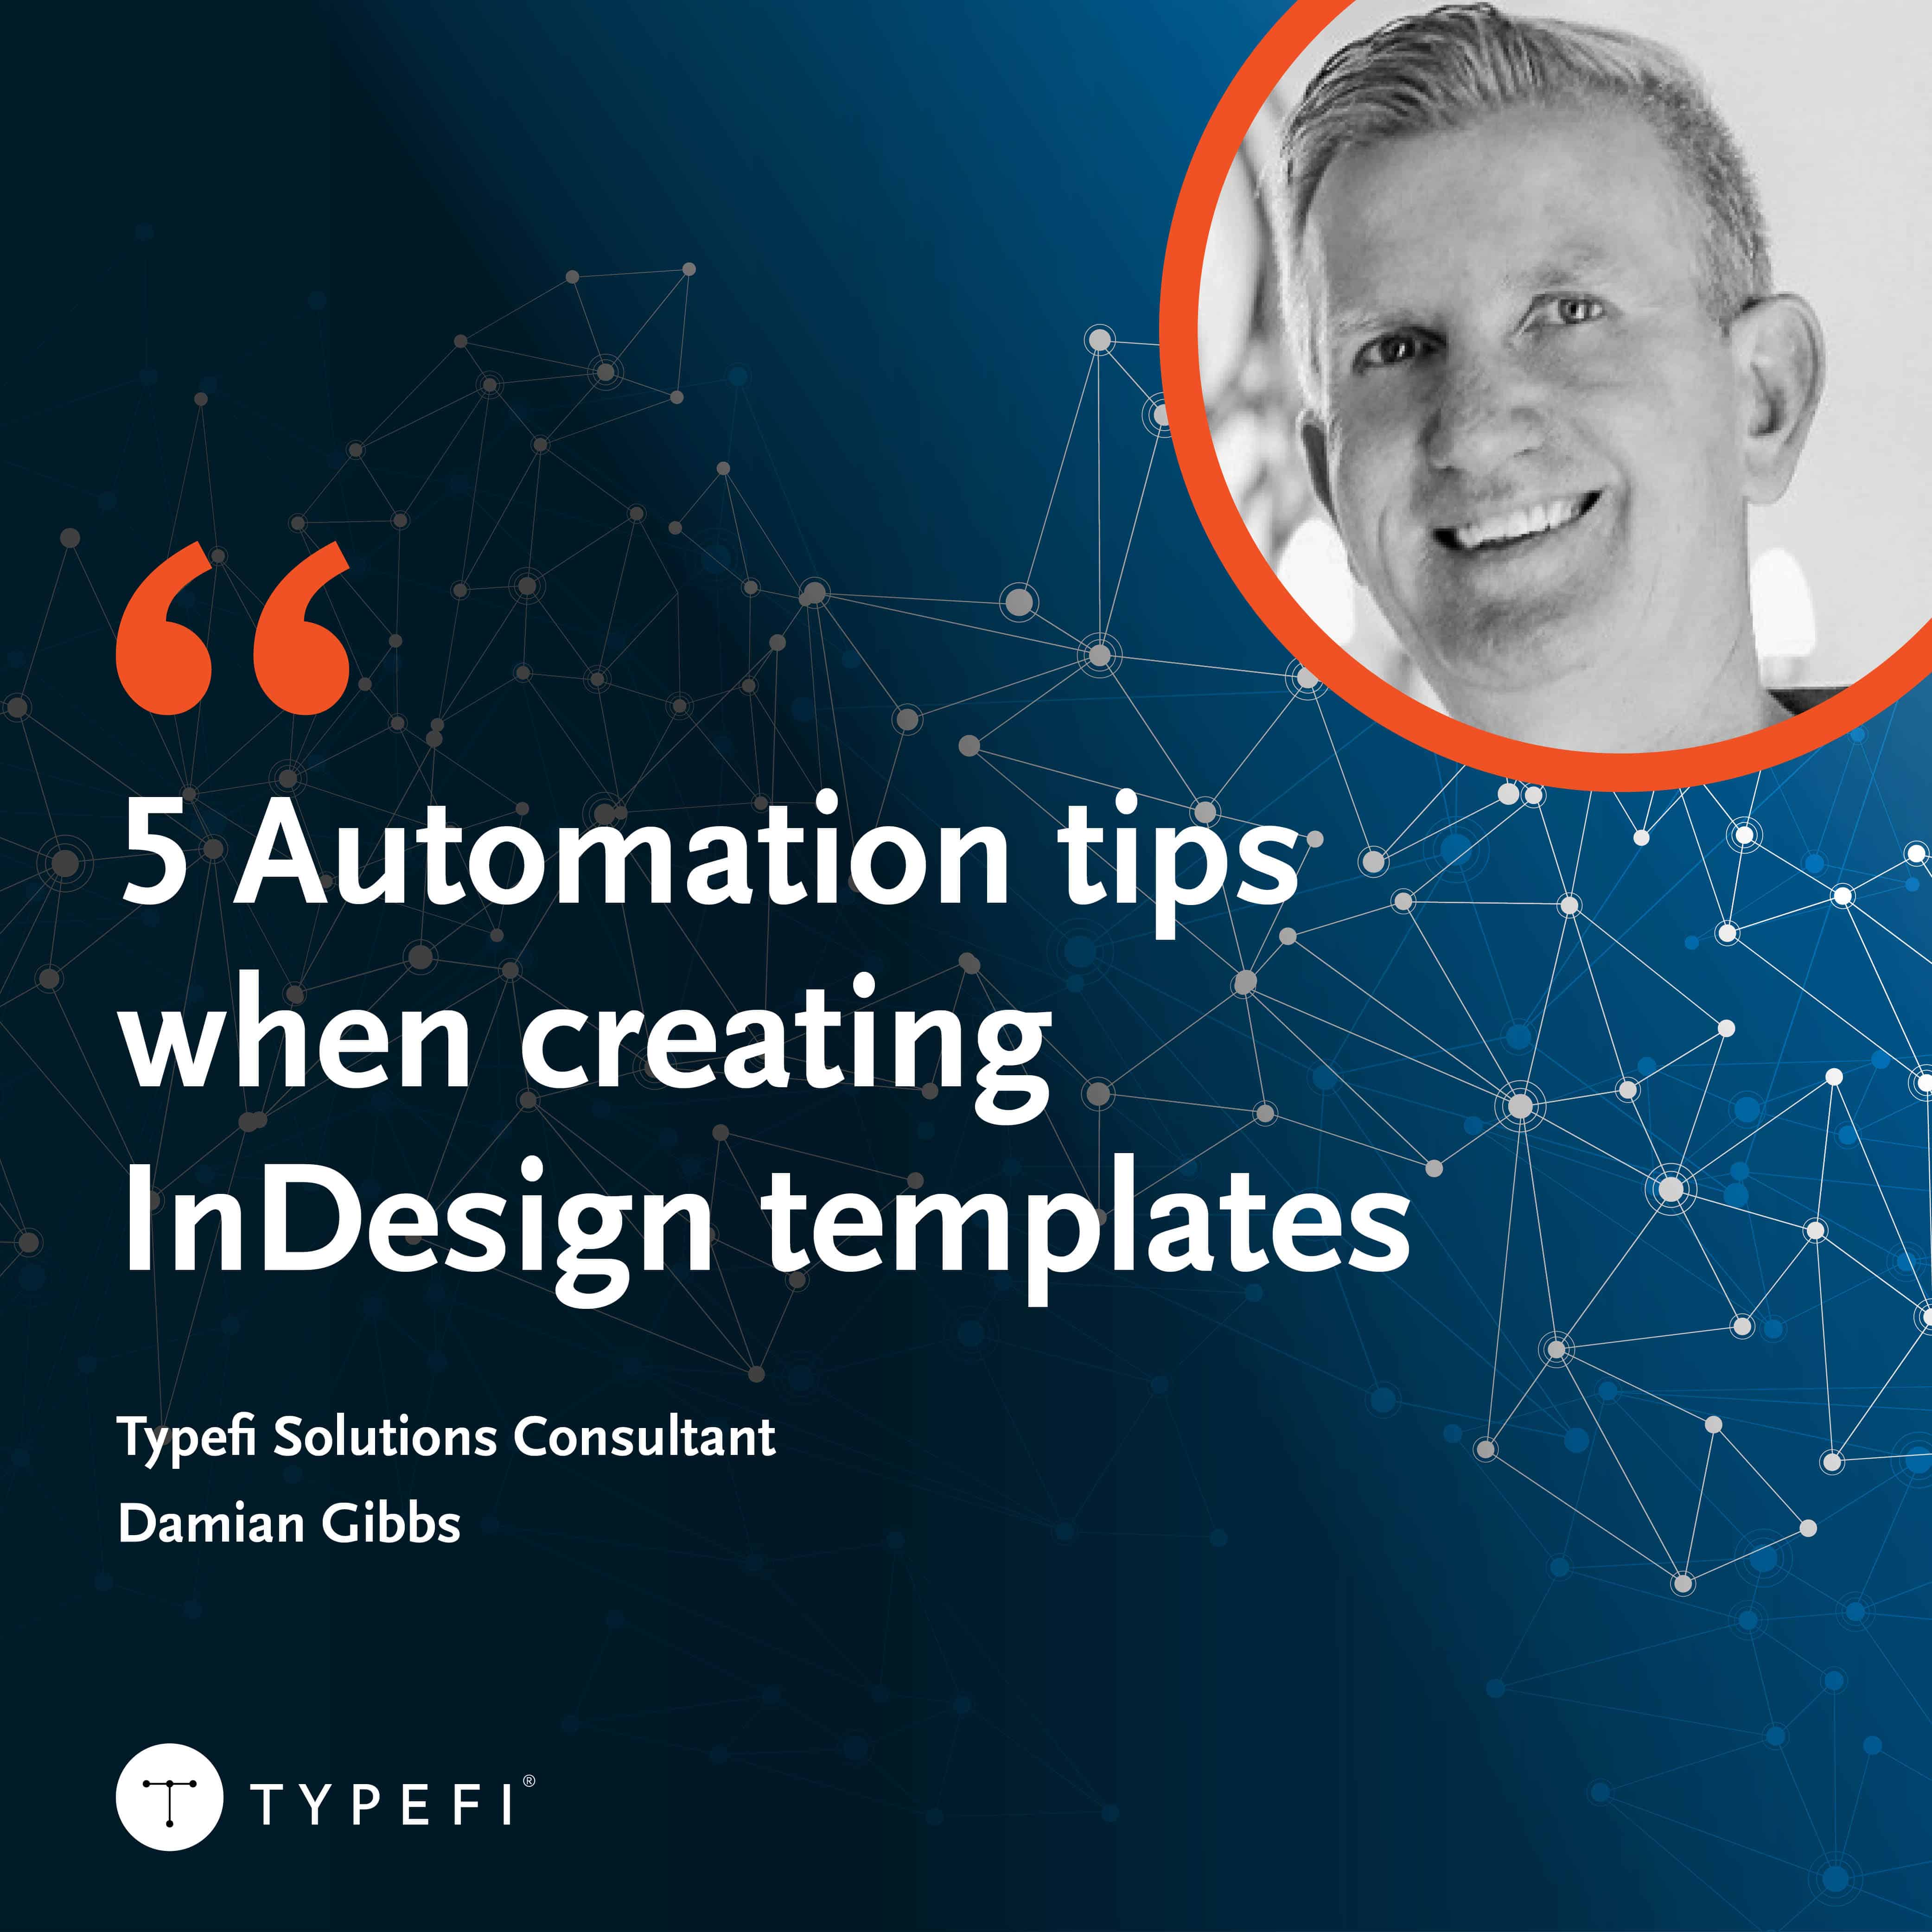 5 Automation tips when creating InDesign templates